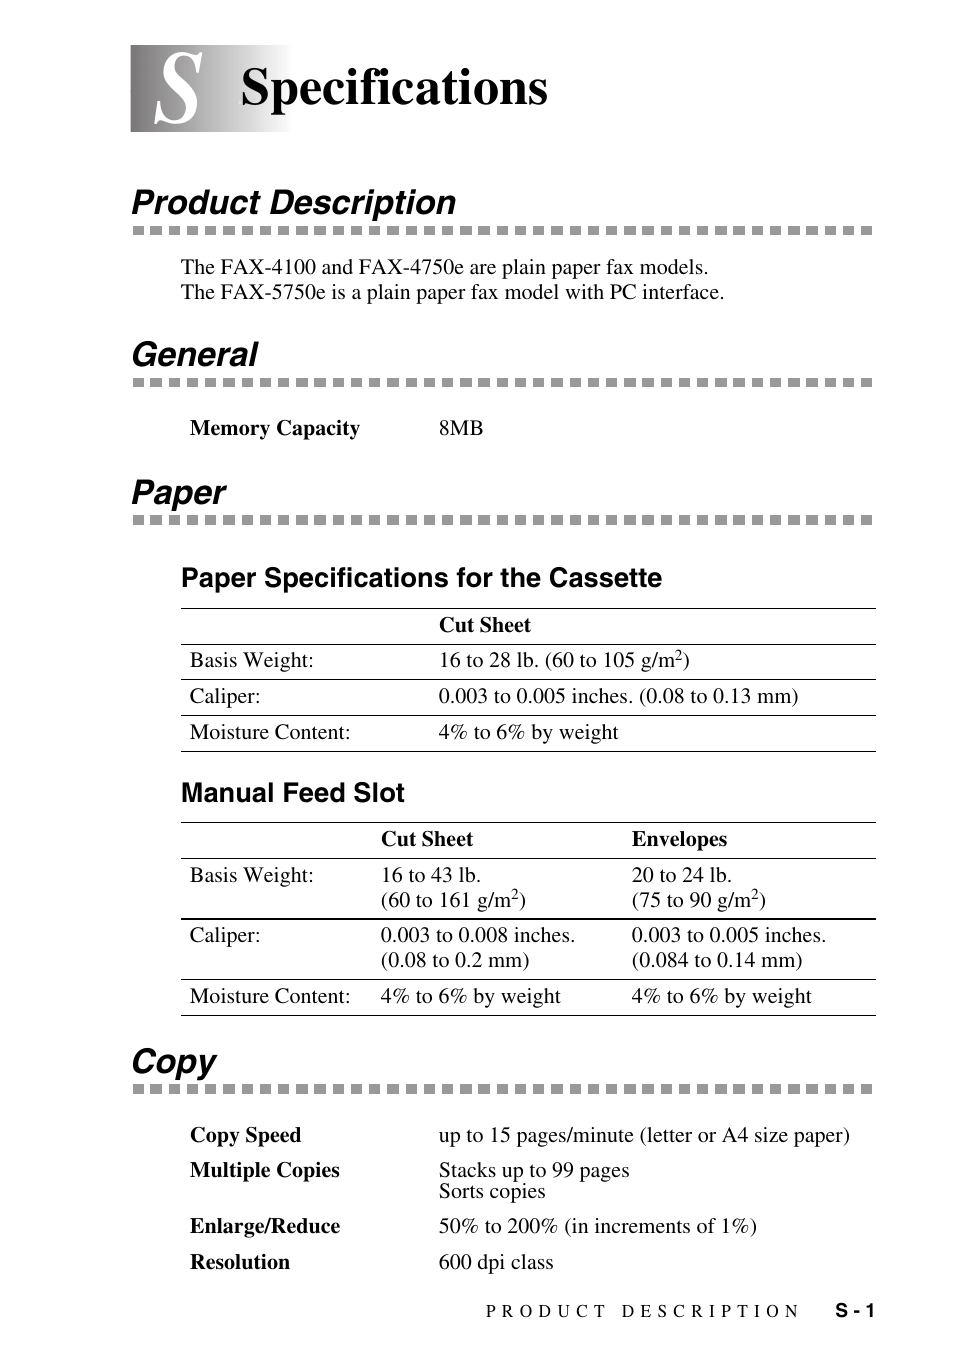 Specifications, Product description, General | Paper, Paper specifications for the cassette, Manual feed slot, Copy, General paper | Brother IntelliFAX 4100e User Manual | Page 141 / 156